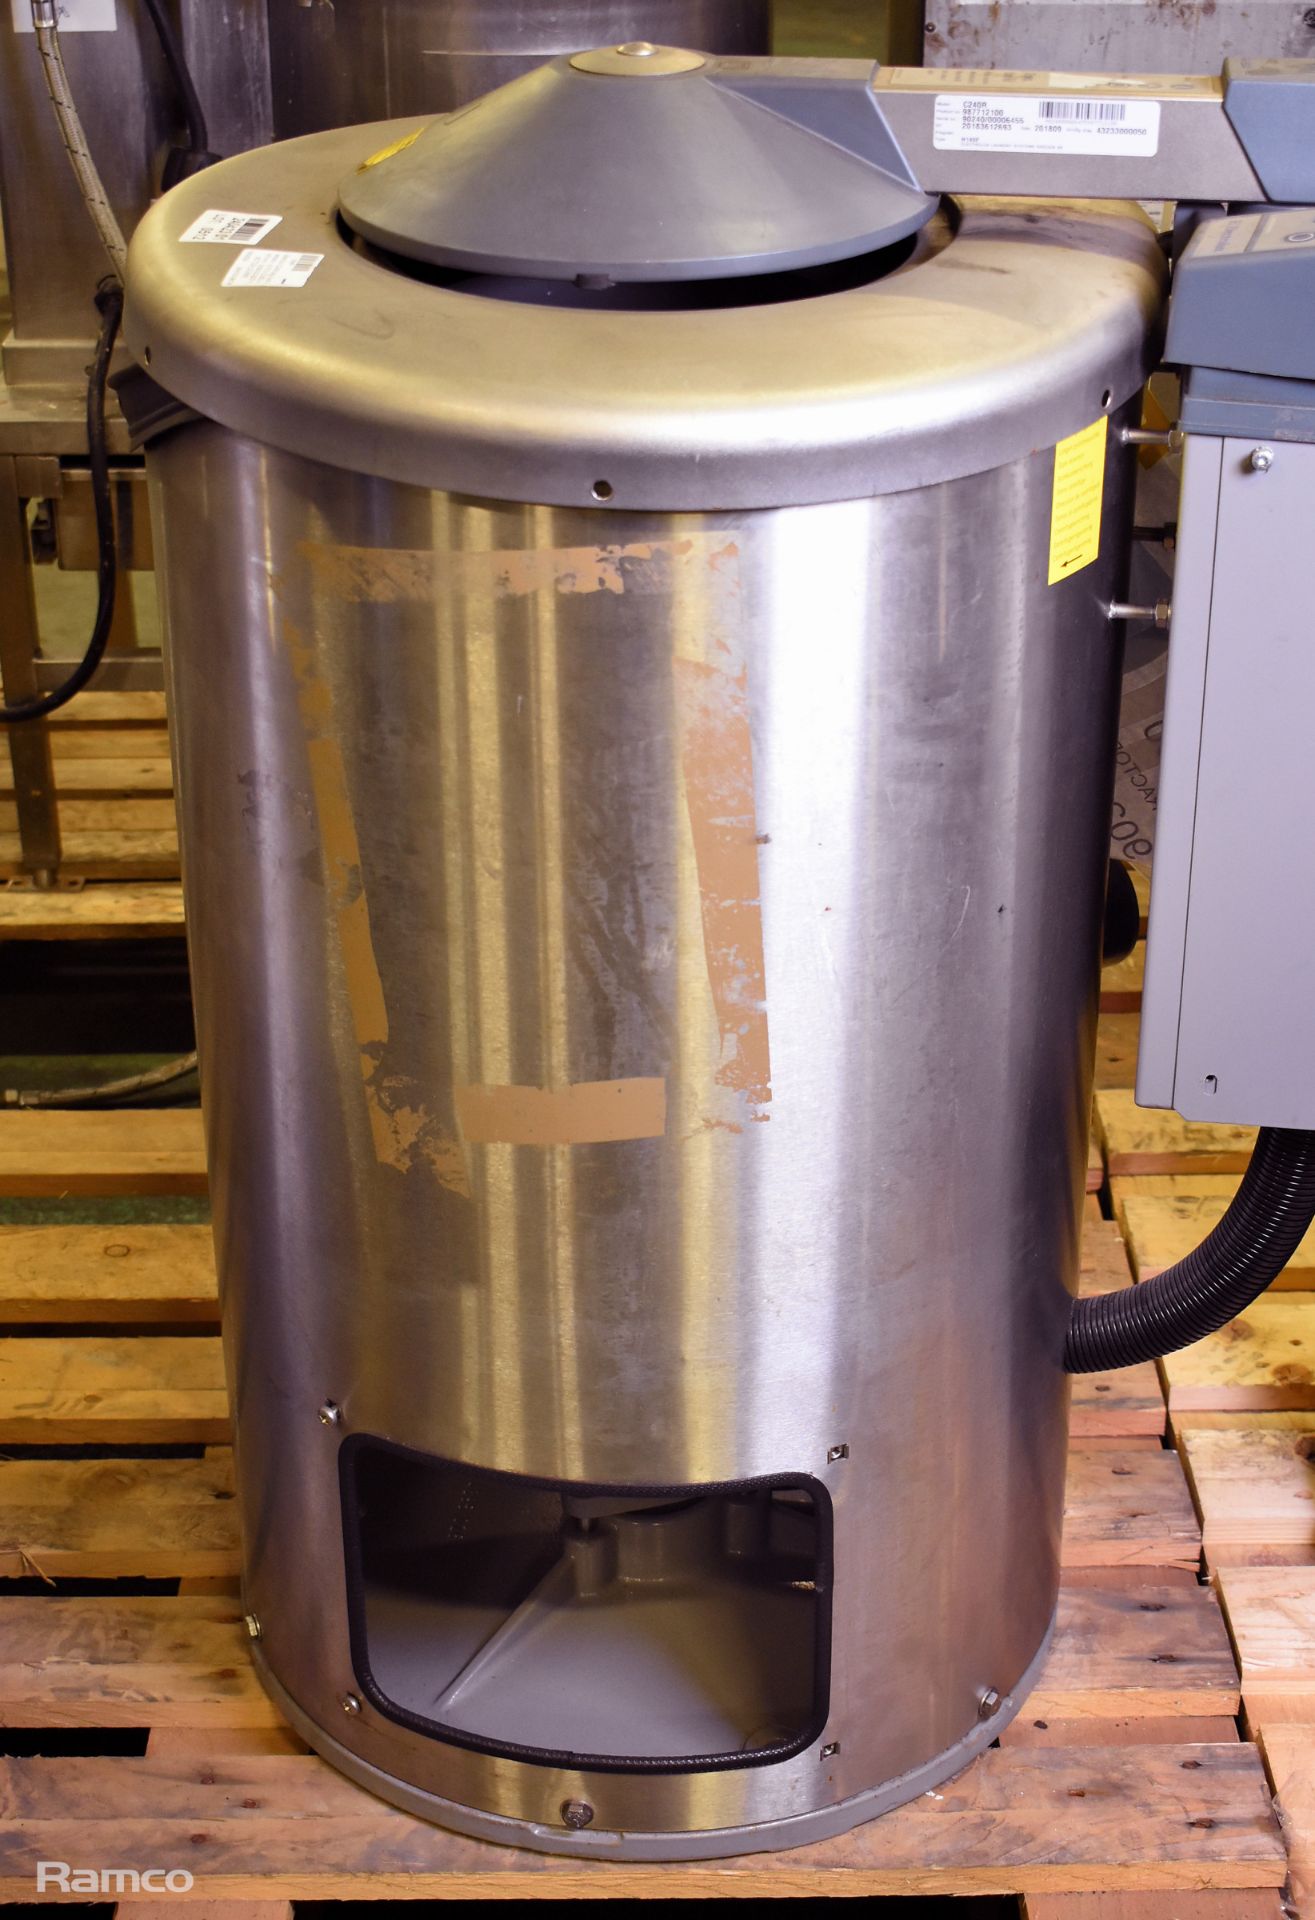 Electrolux C240R 8kg hydro extractor - W 515 x D 660 x H 910mm - MISSING BOTH BOTTOM COVERS - Image 8 of 9